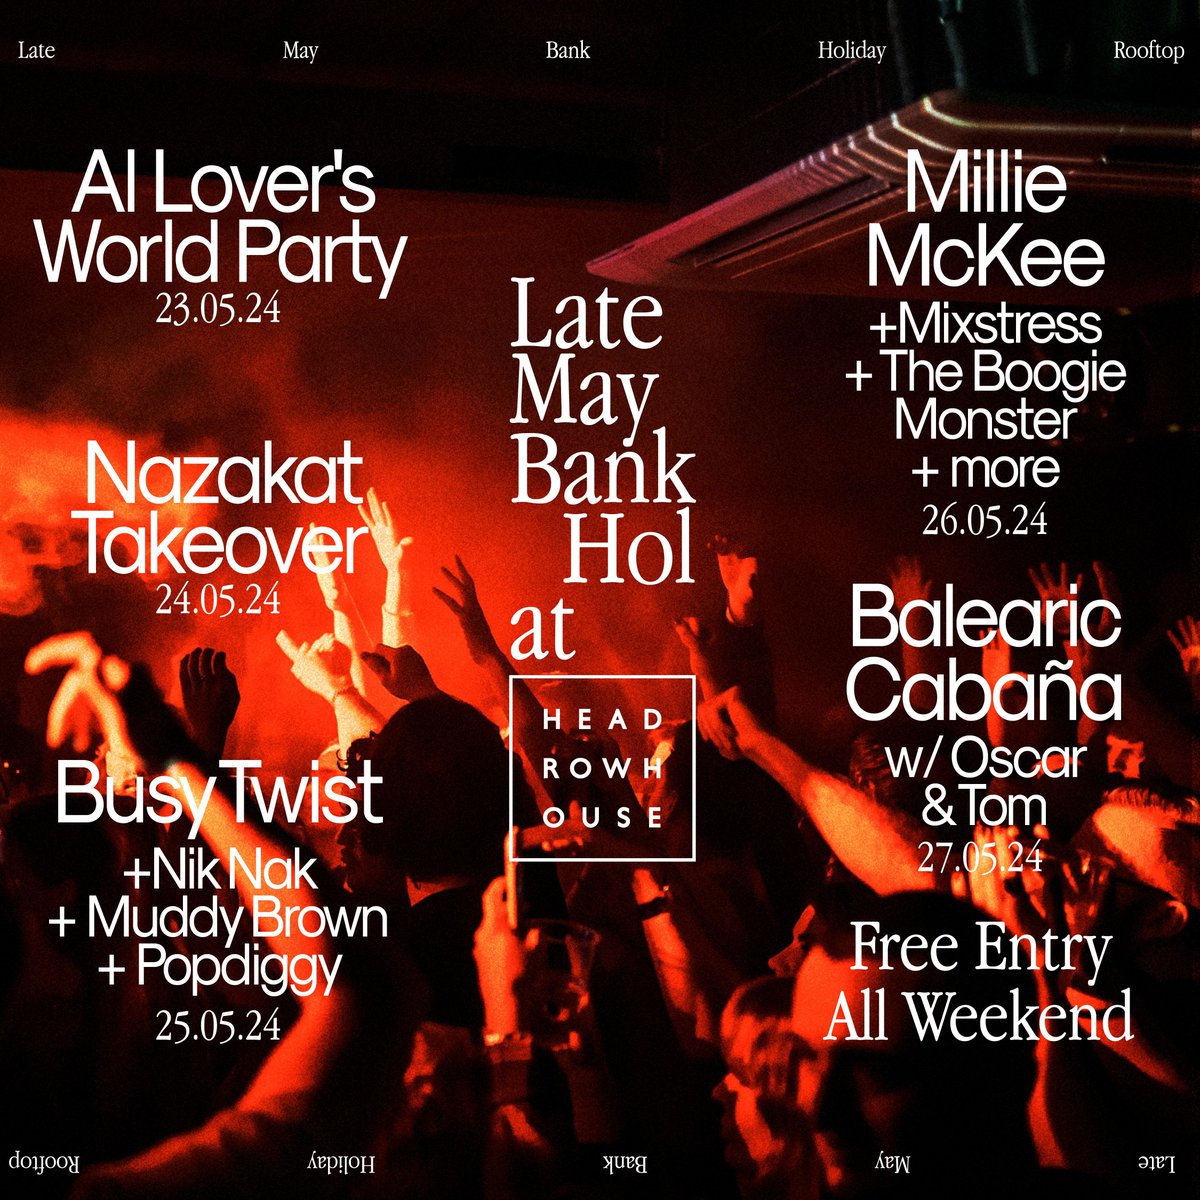 link.dice.fm/qNXGe4WjsJb Late May bank holiday goodness with Al Lover, Nazakat, Busy Twist, Millie McKee, Baleriac Cabaña and more on the Headrow House rooftop 👏 Free entry as always! Claim your free tickets via the link above.